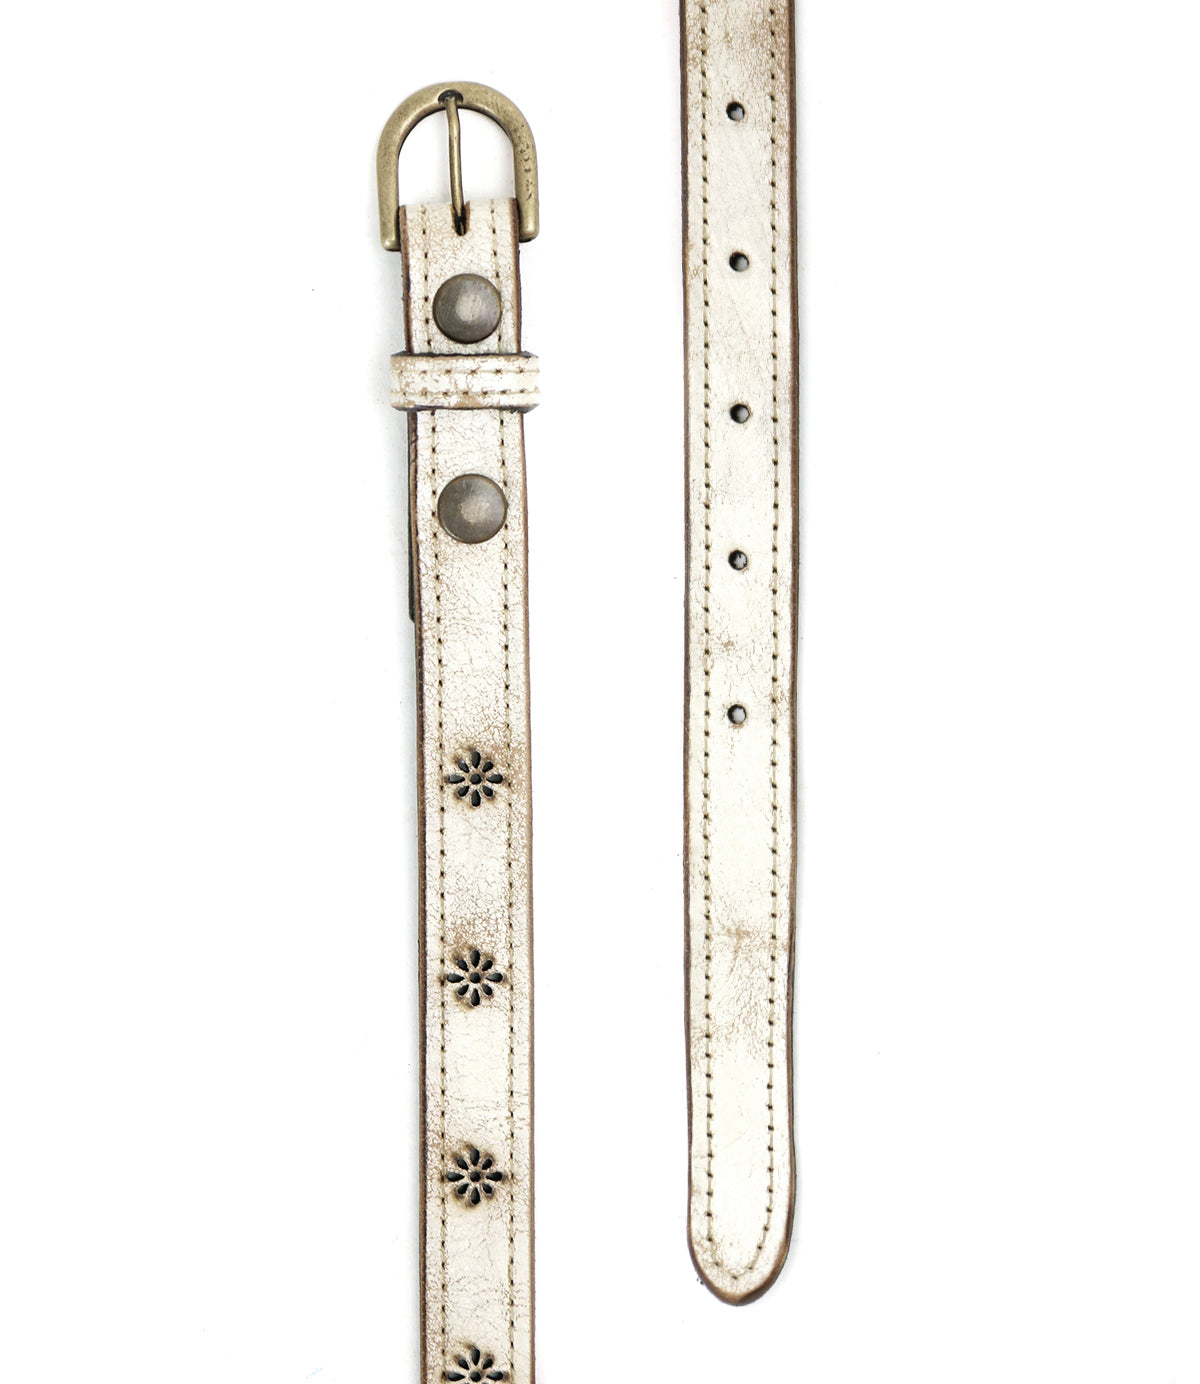 An accessory made of leather, the Bed Stu Monae II belt features studs for added style.